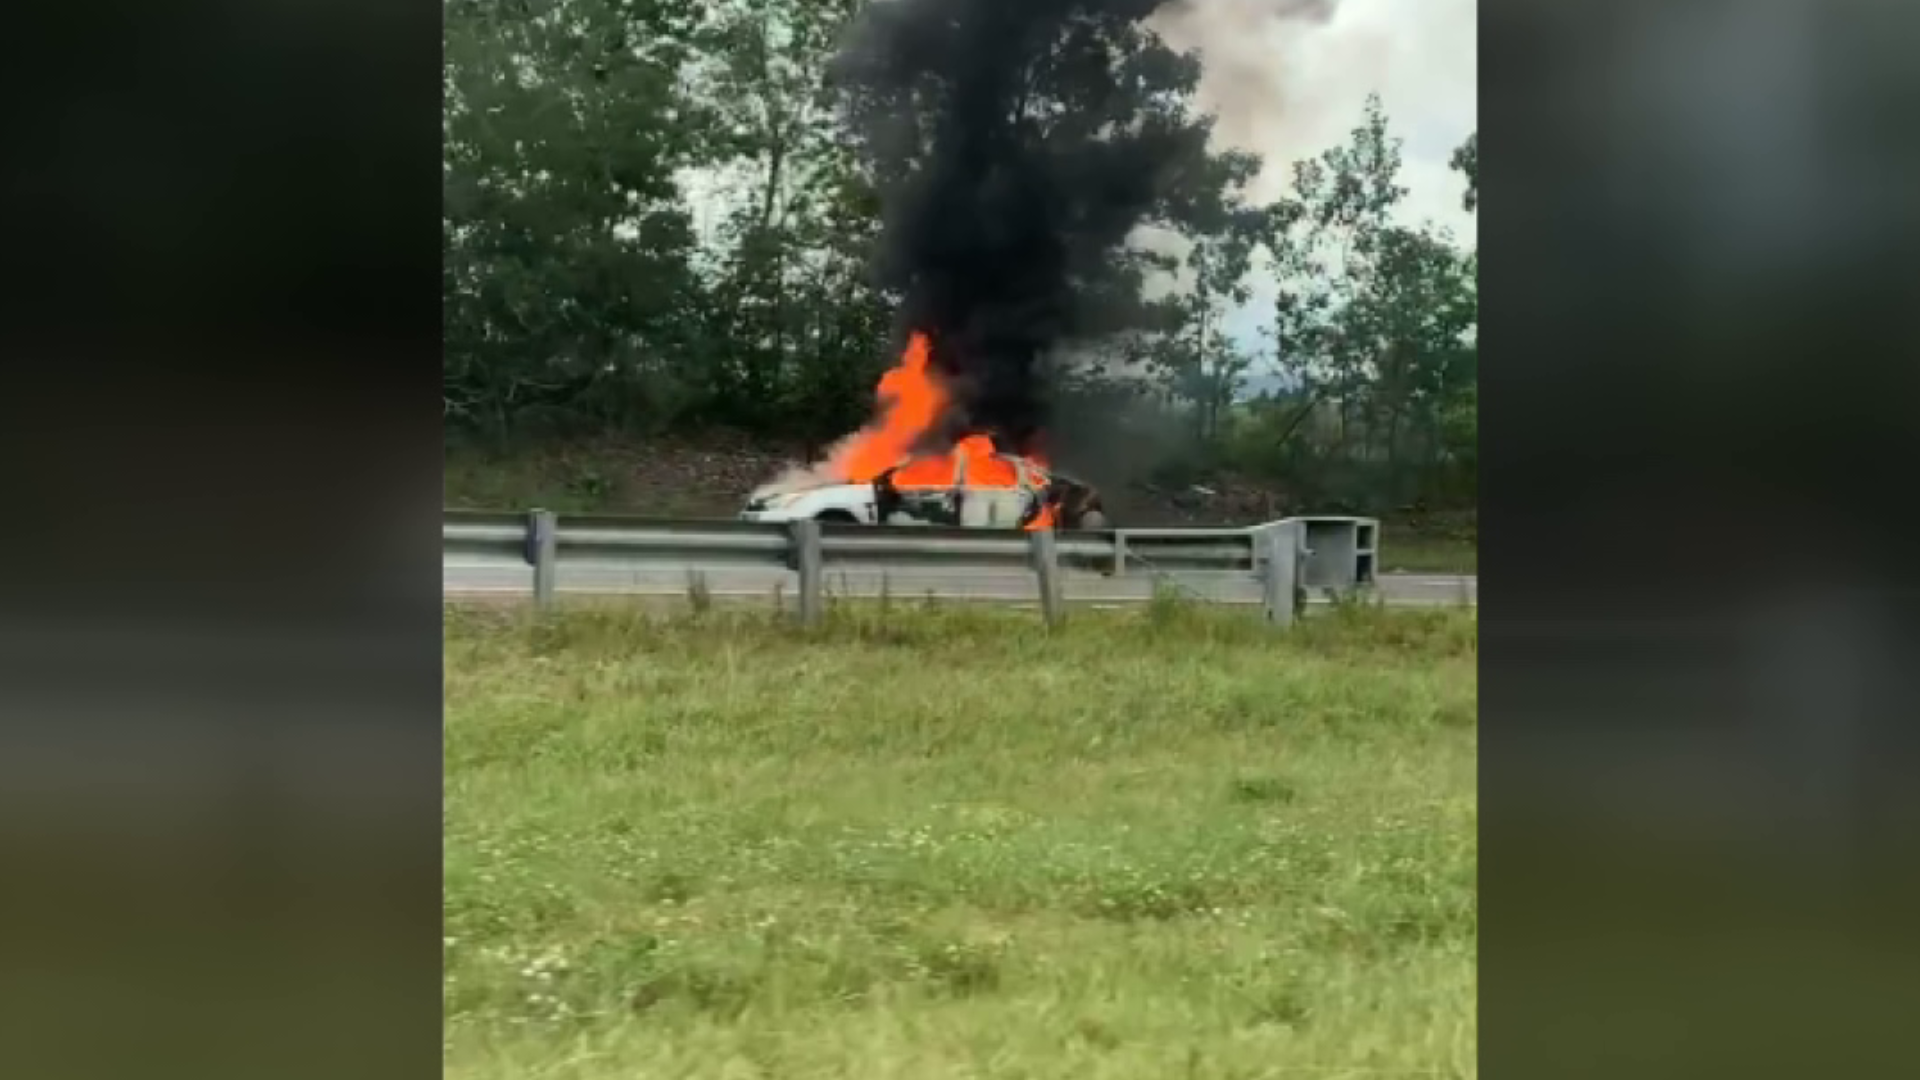 So far, there is no word on what caused the car fire.